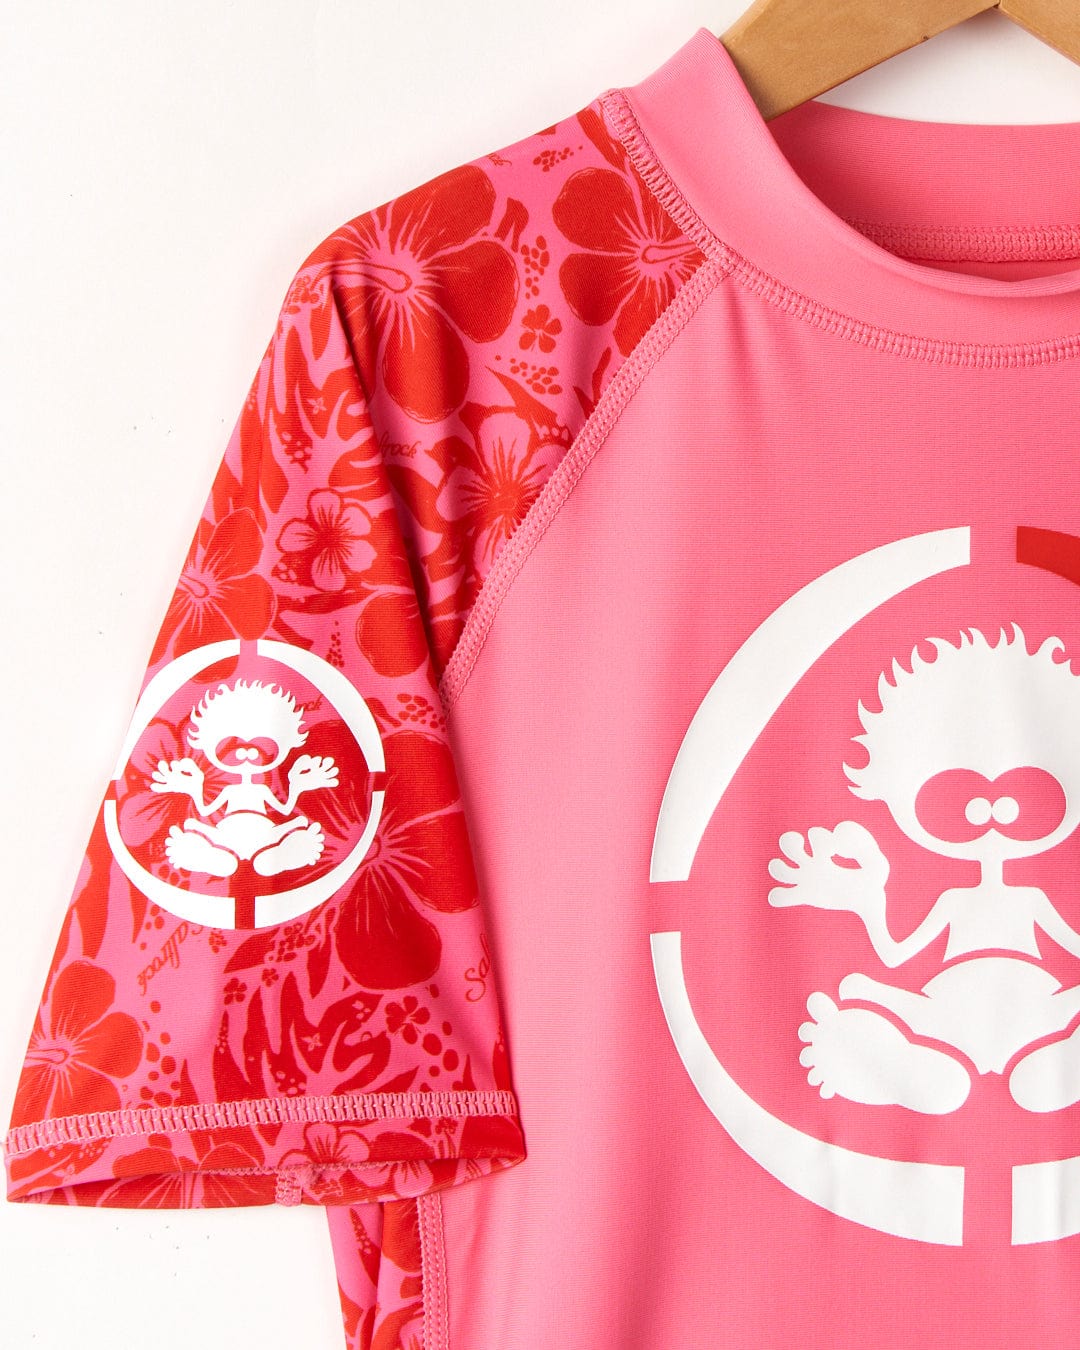 A close-up of a pink Saltrock Hibiscus rash vest with a graphic of a cartoon monkey in the center, hanging on a wooden hanger against a white background.